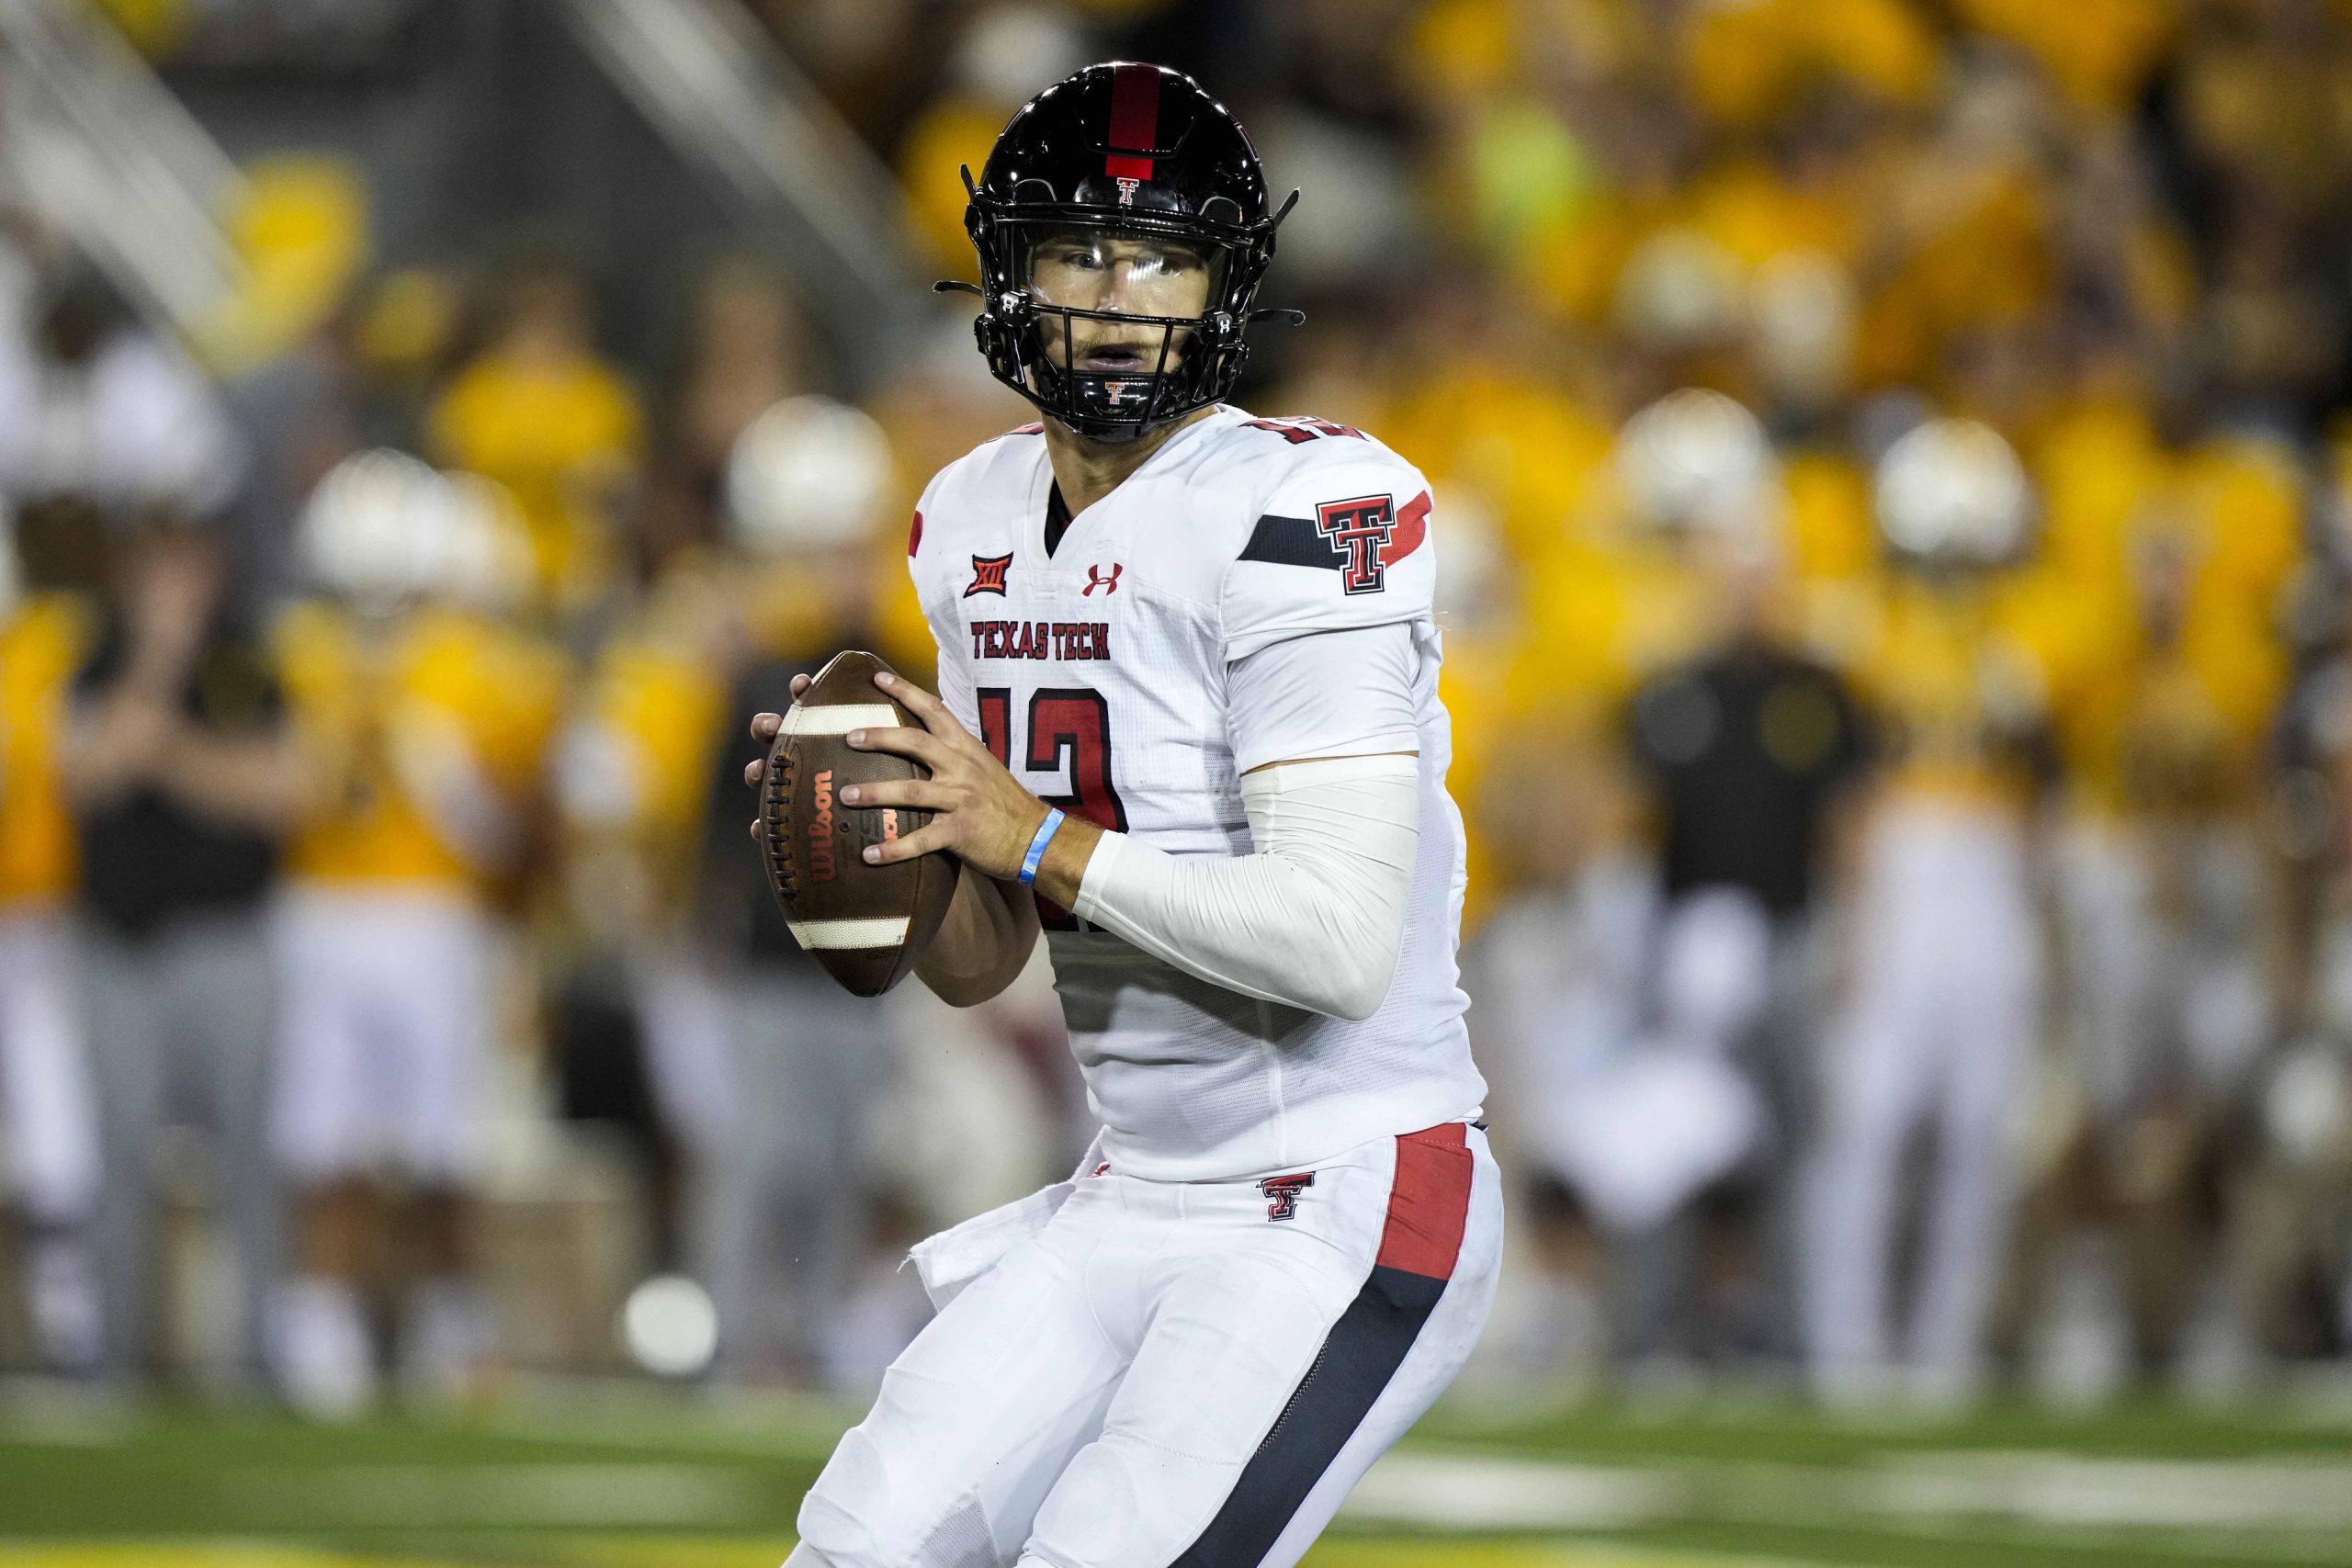 In order to secure a Texas Tech week two victory over Oregon, it will come down to the play of Oregon's former quarterback.